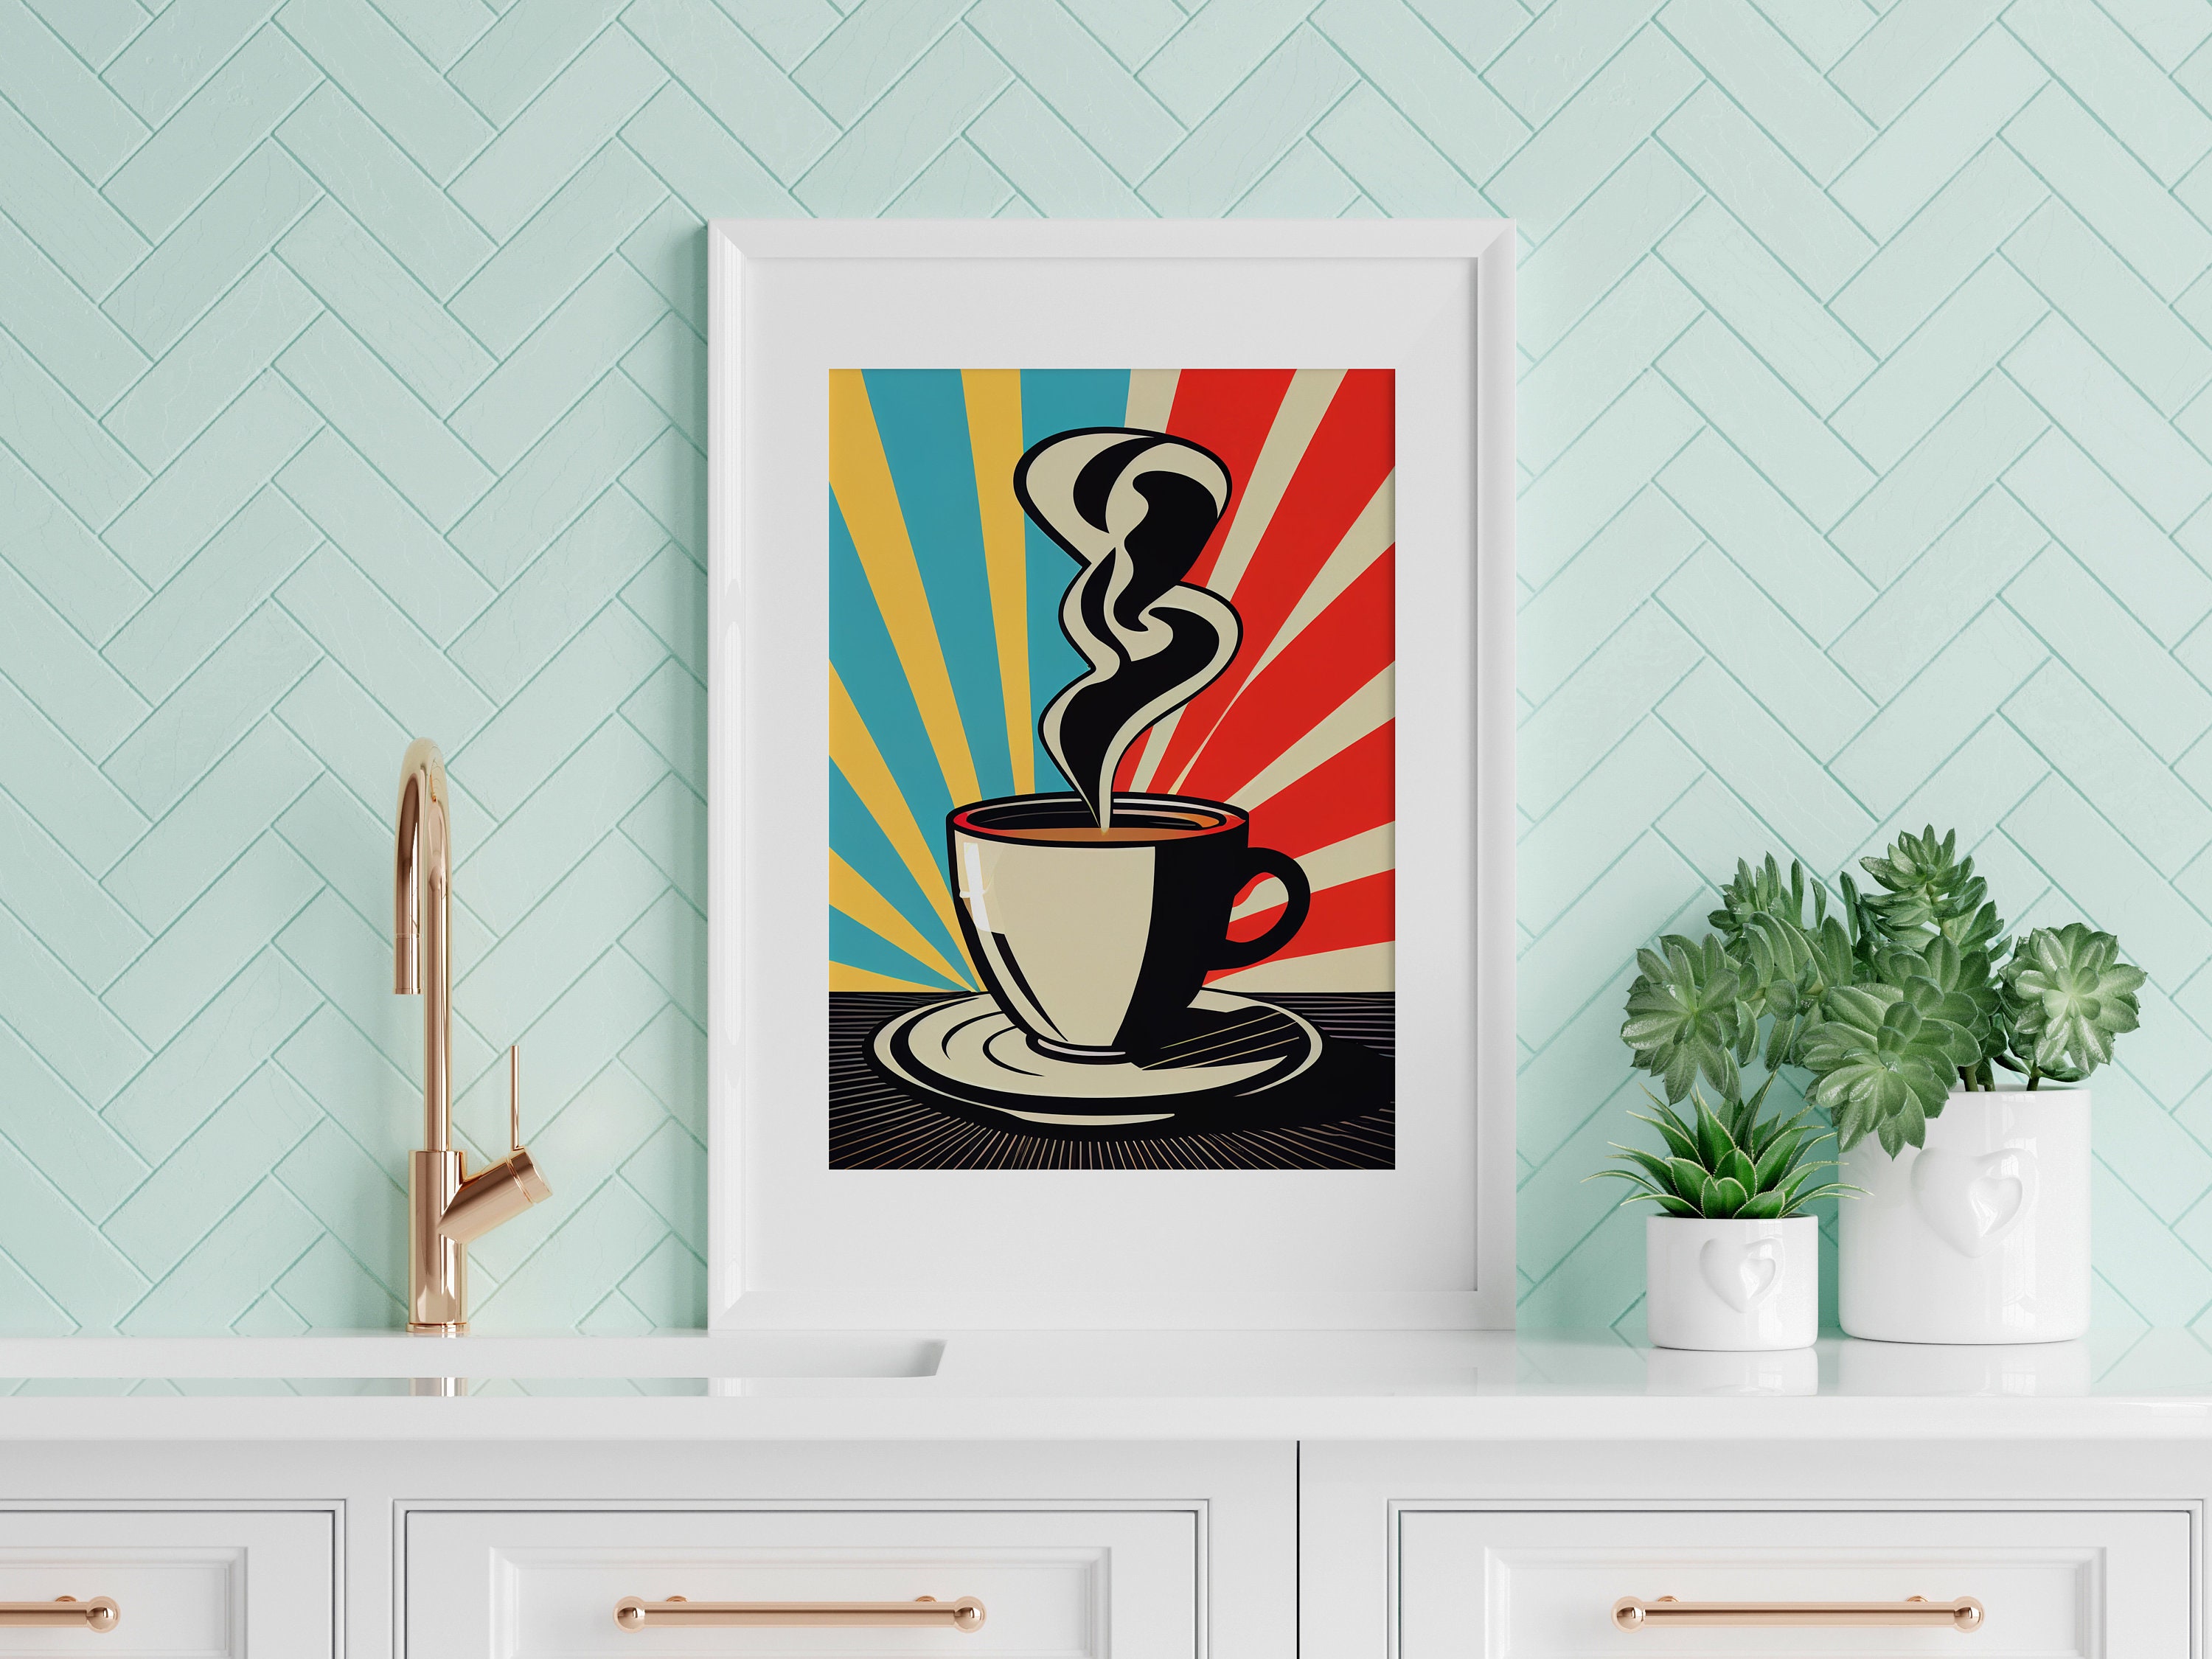 97 Decor Coffee Bar Decor - Coffee Wall Decor, Coffee Poster Print, Coffee  Bar Essentials, Coffee Cart Accessories, Eclectic Coffee Shop Decorations